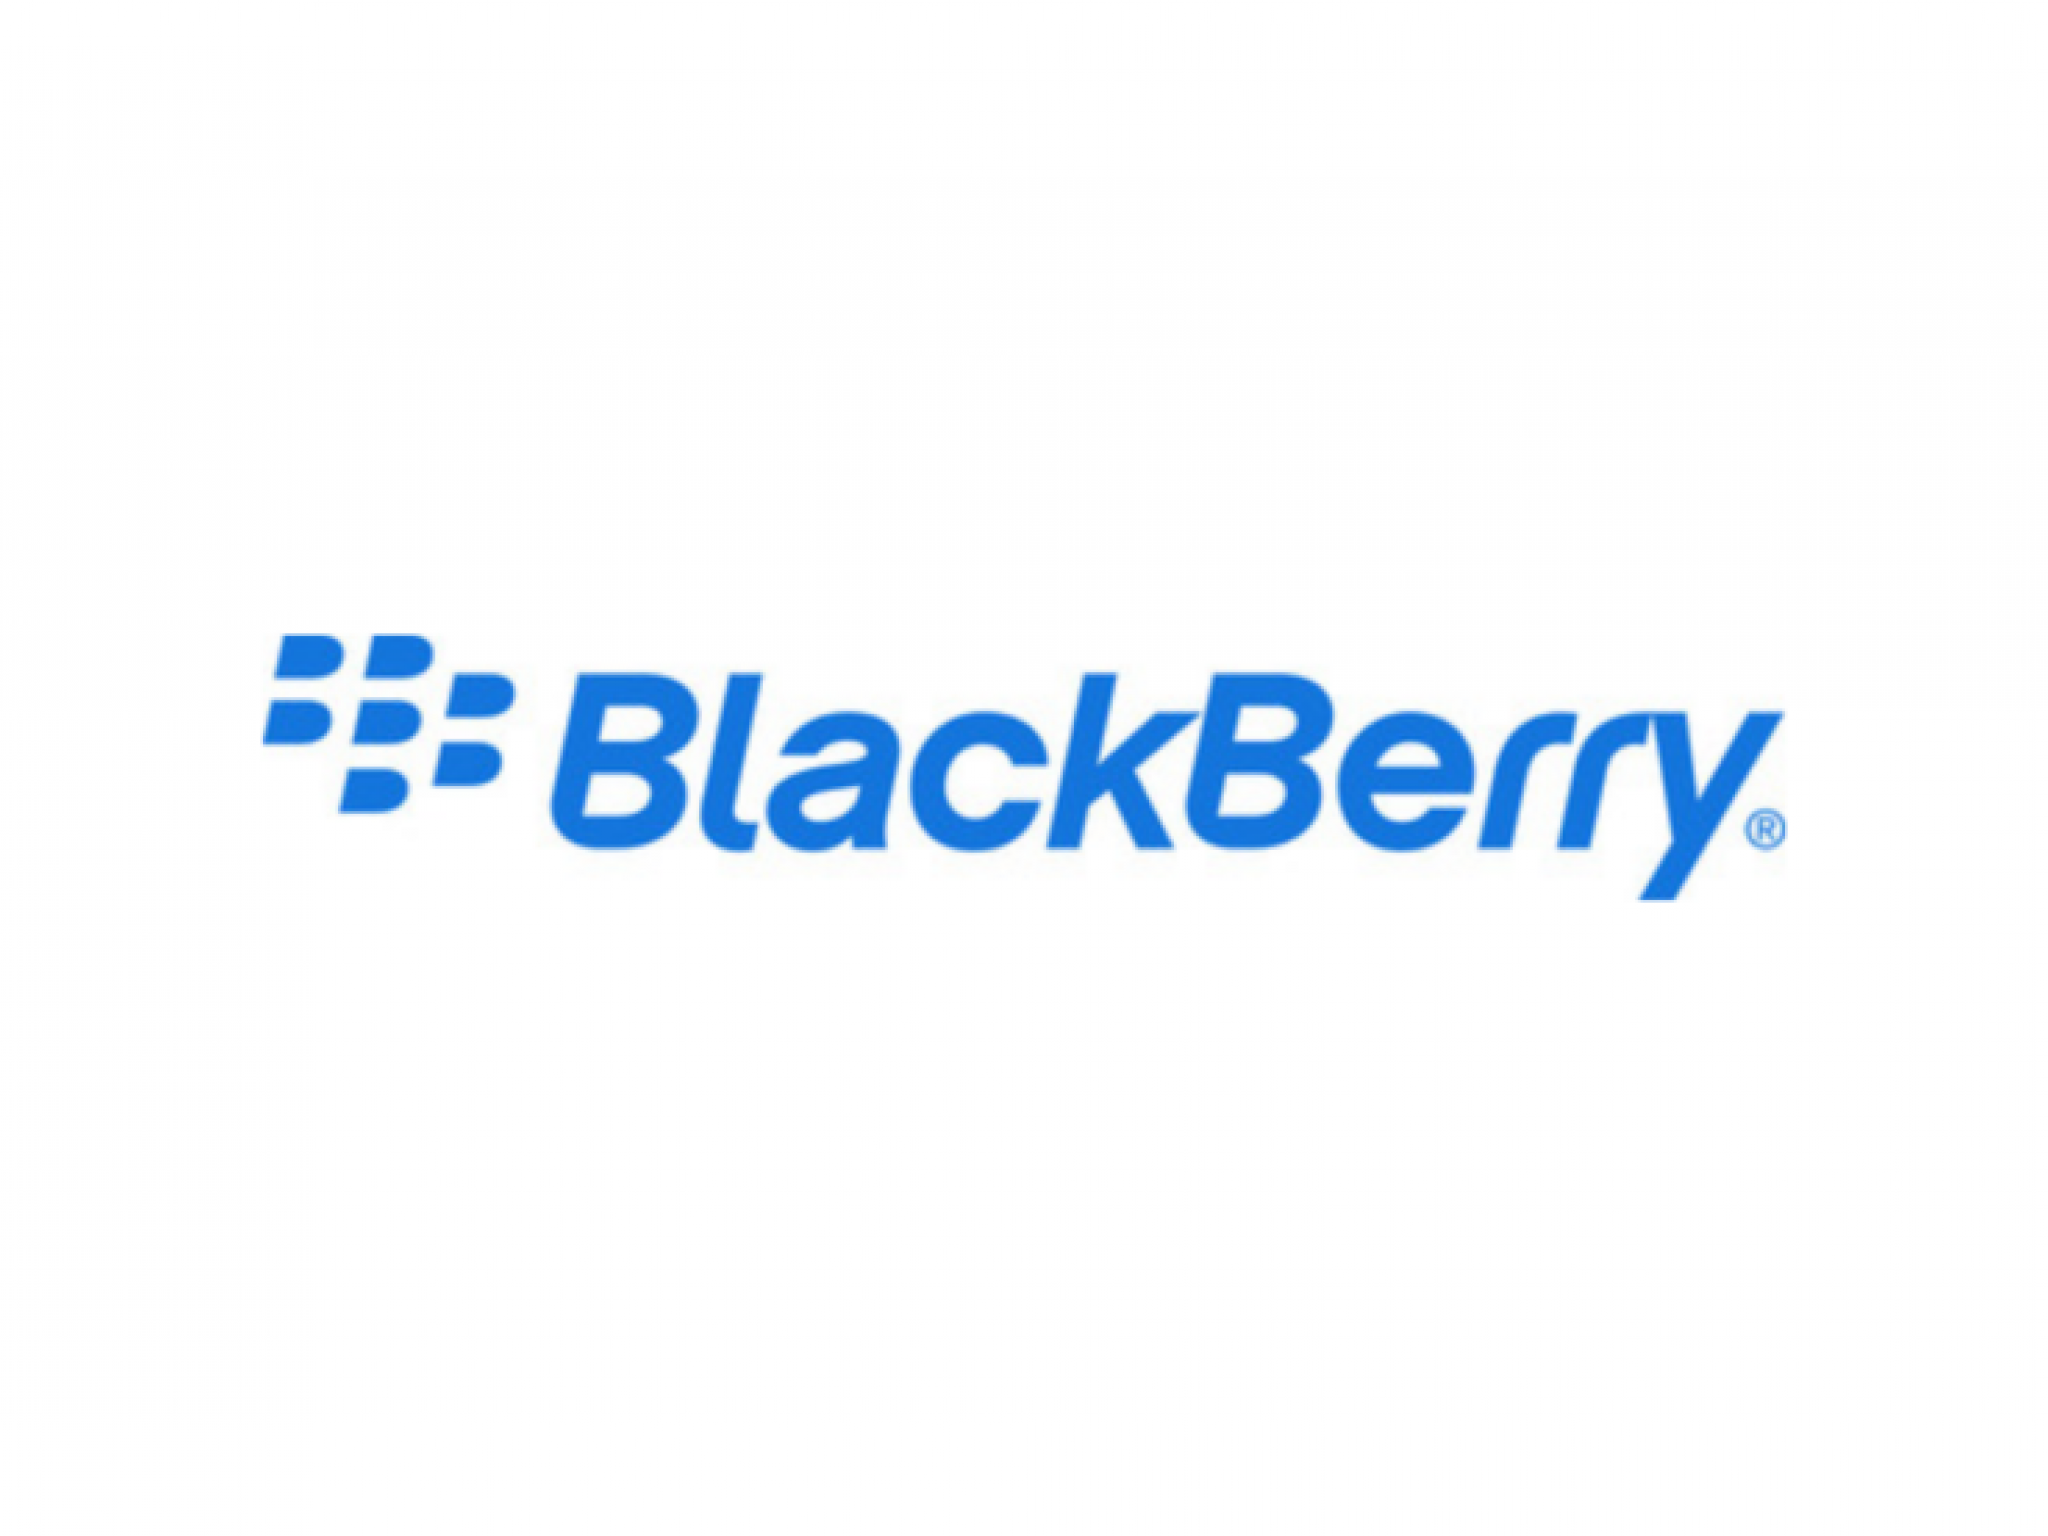 What’s Going On With BlackBerry Shares Today?